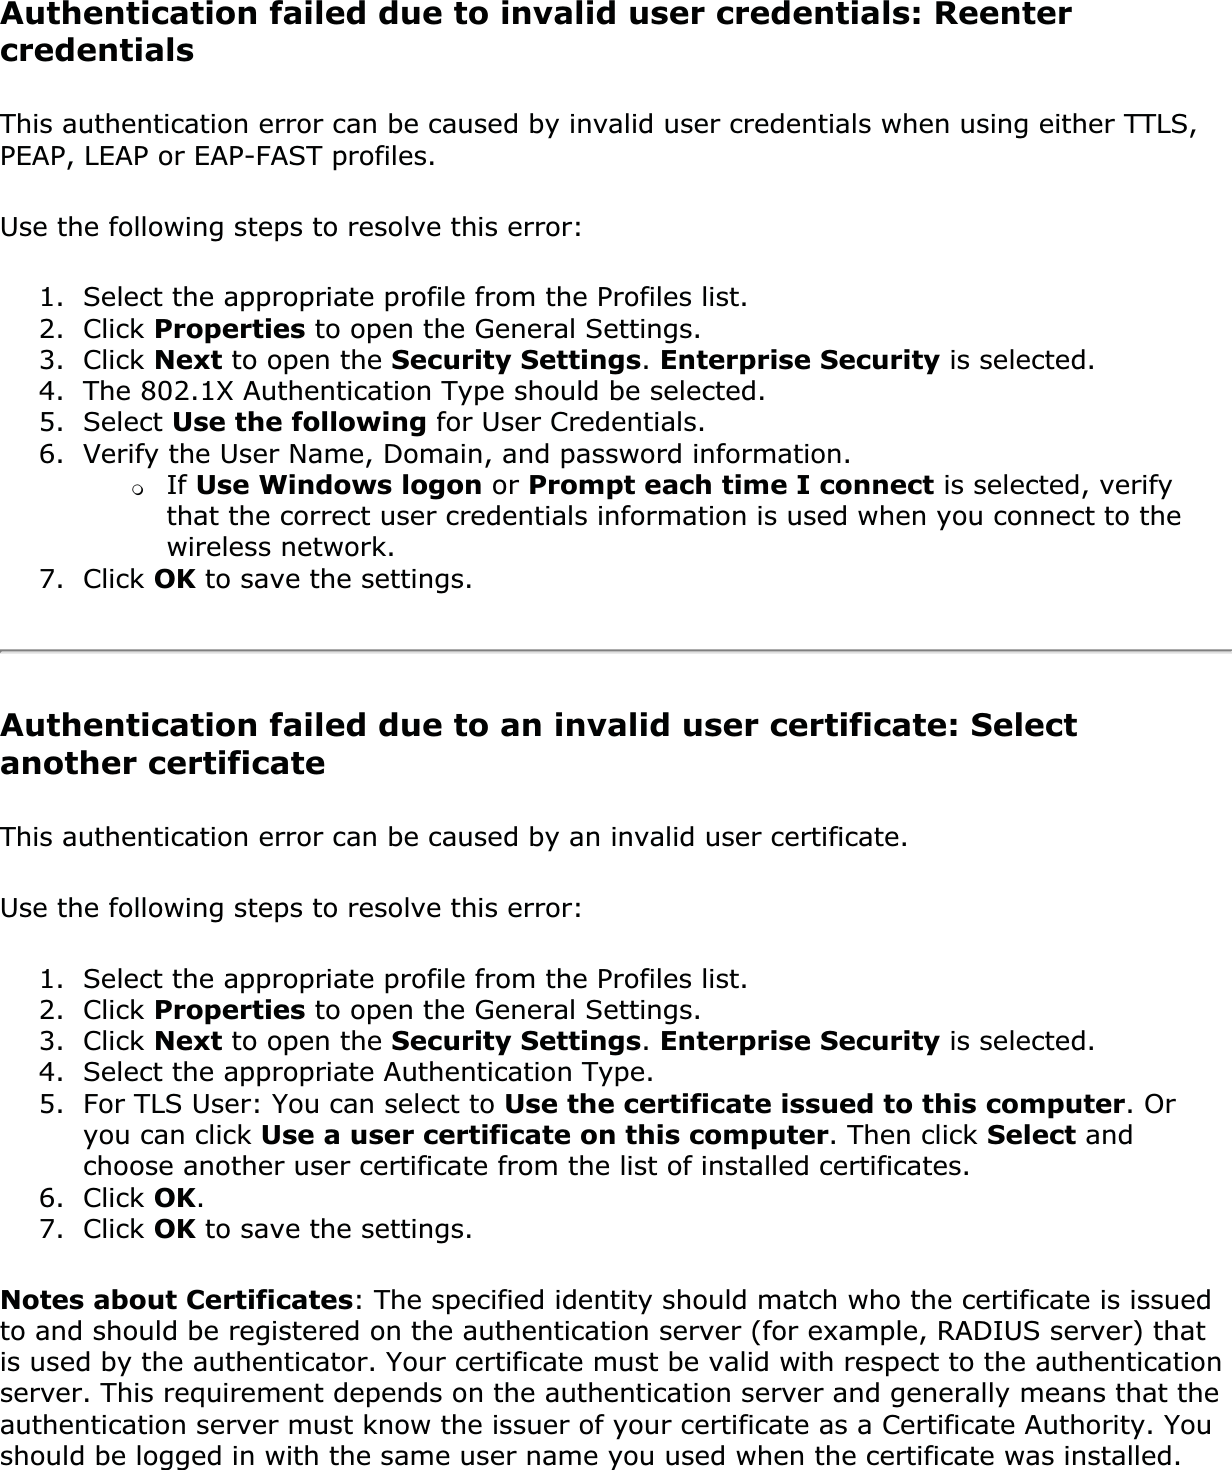 Authentication failed due to invalid user credentials: Reenter credentialsThis authentication error can be caused by invalid user credentials when using either TTLS, PEAP, LEAP or EAP-FAST profiles.Use the following steps to resolve this error:1. Select the appropriate profile from the Profiles list.2. Click Properties to open the General Settings. 3. Click Next to open the Security Settings.Enterprise Security is selected. 4. The 802.1X Authentication Type should be selected.5. Select Use the following for User Credentials.6. Verify the User Name, Domain, and password information.❍If Use Windows logon or Prompt each time I connect is selected, verify that the correct user credentials information is used when you connect to the wireless network.7. Click OK to save the settings.Authentication failed due to an invalid user certificate: Select another certificateThis authentication error can be caused by an invalid user certificate. Use the following steps to resolve this error:1. Select the appropriate profile from the Profiles list.2. Click Properties to open the General Settings.3. Click Next to open the Security Settings.Enterprise Security is selected.4. Select the appropriate Authentication Type.5. For TLS User: You can select to Use the certificate issued to this computer. Or you can click Use a user certificate on this computer. Then click Select and choose another user certificate from the list of installed certificates.6. Click OK.7. Click OK to save the settings.Notes about Certificates: The specified identity should match who the certificate is issued to and should be registered on the authentication server (for example, RADIUS server) that is used by the authenticator. Your certificate must be valid with respect to the authentication server. This requirement depends on the authentication server and generally means that the authentication server must know the issuer of your certificate as a Certificate Authority. You should be logged in with the same user name you used when the certificate was installed.